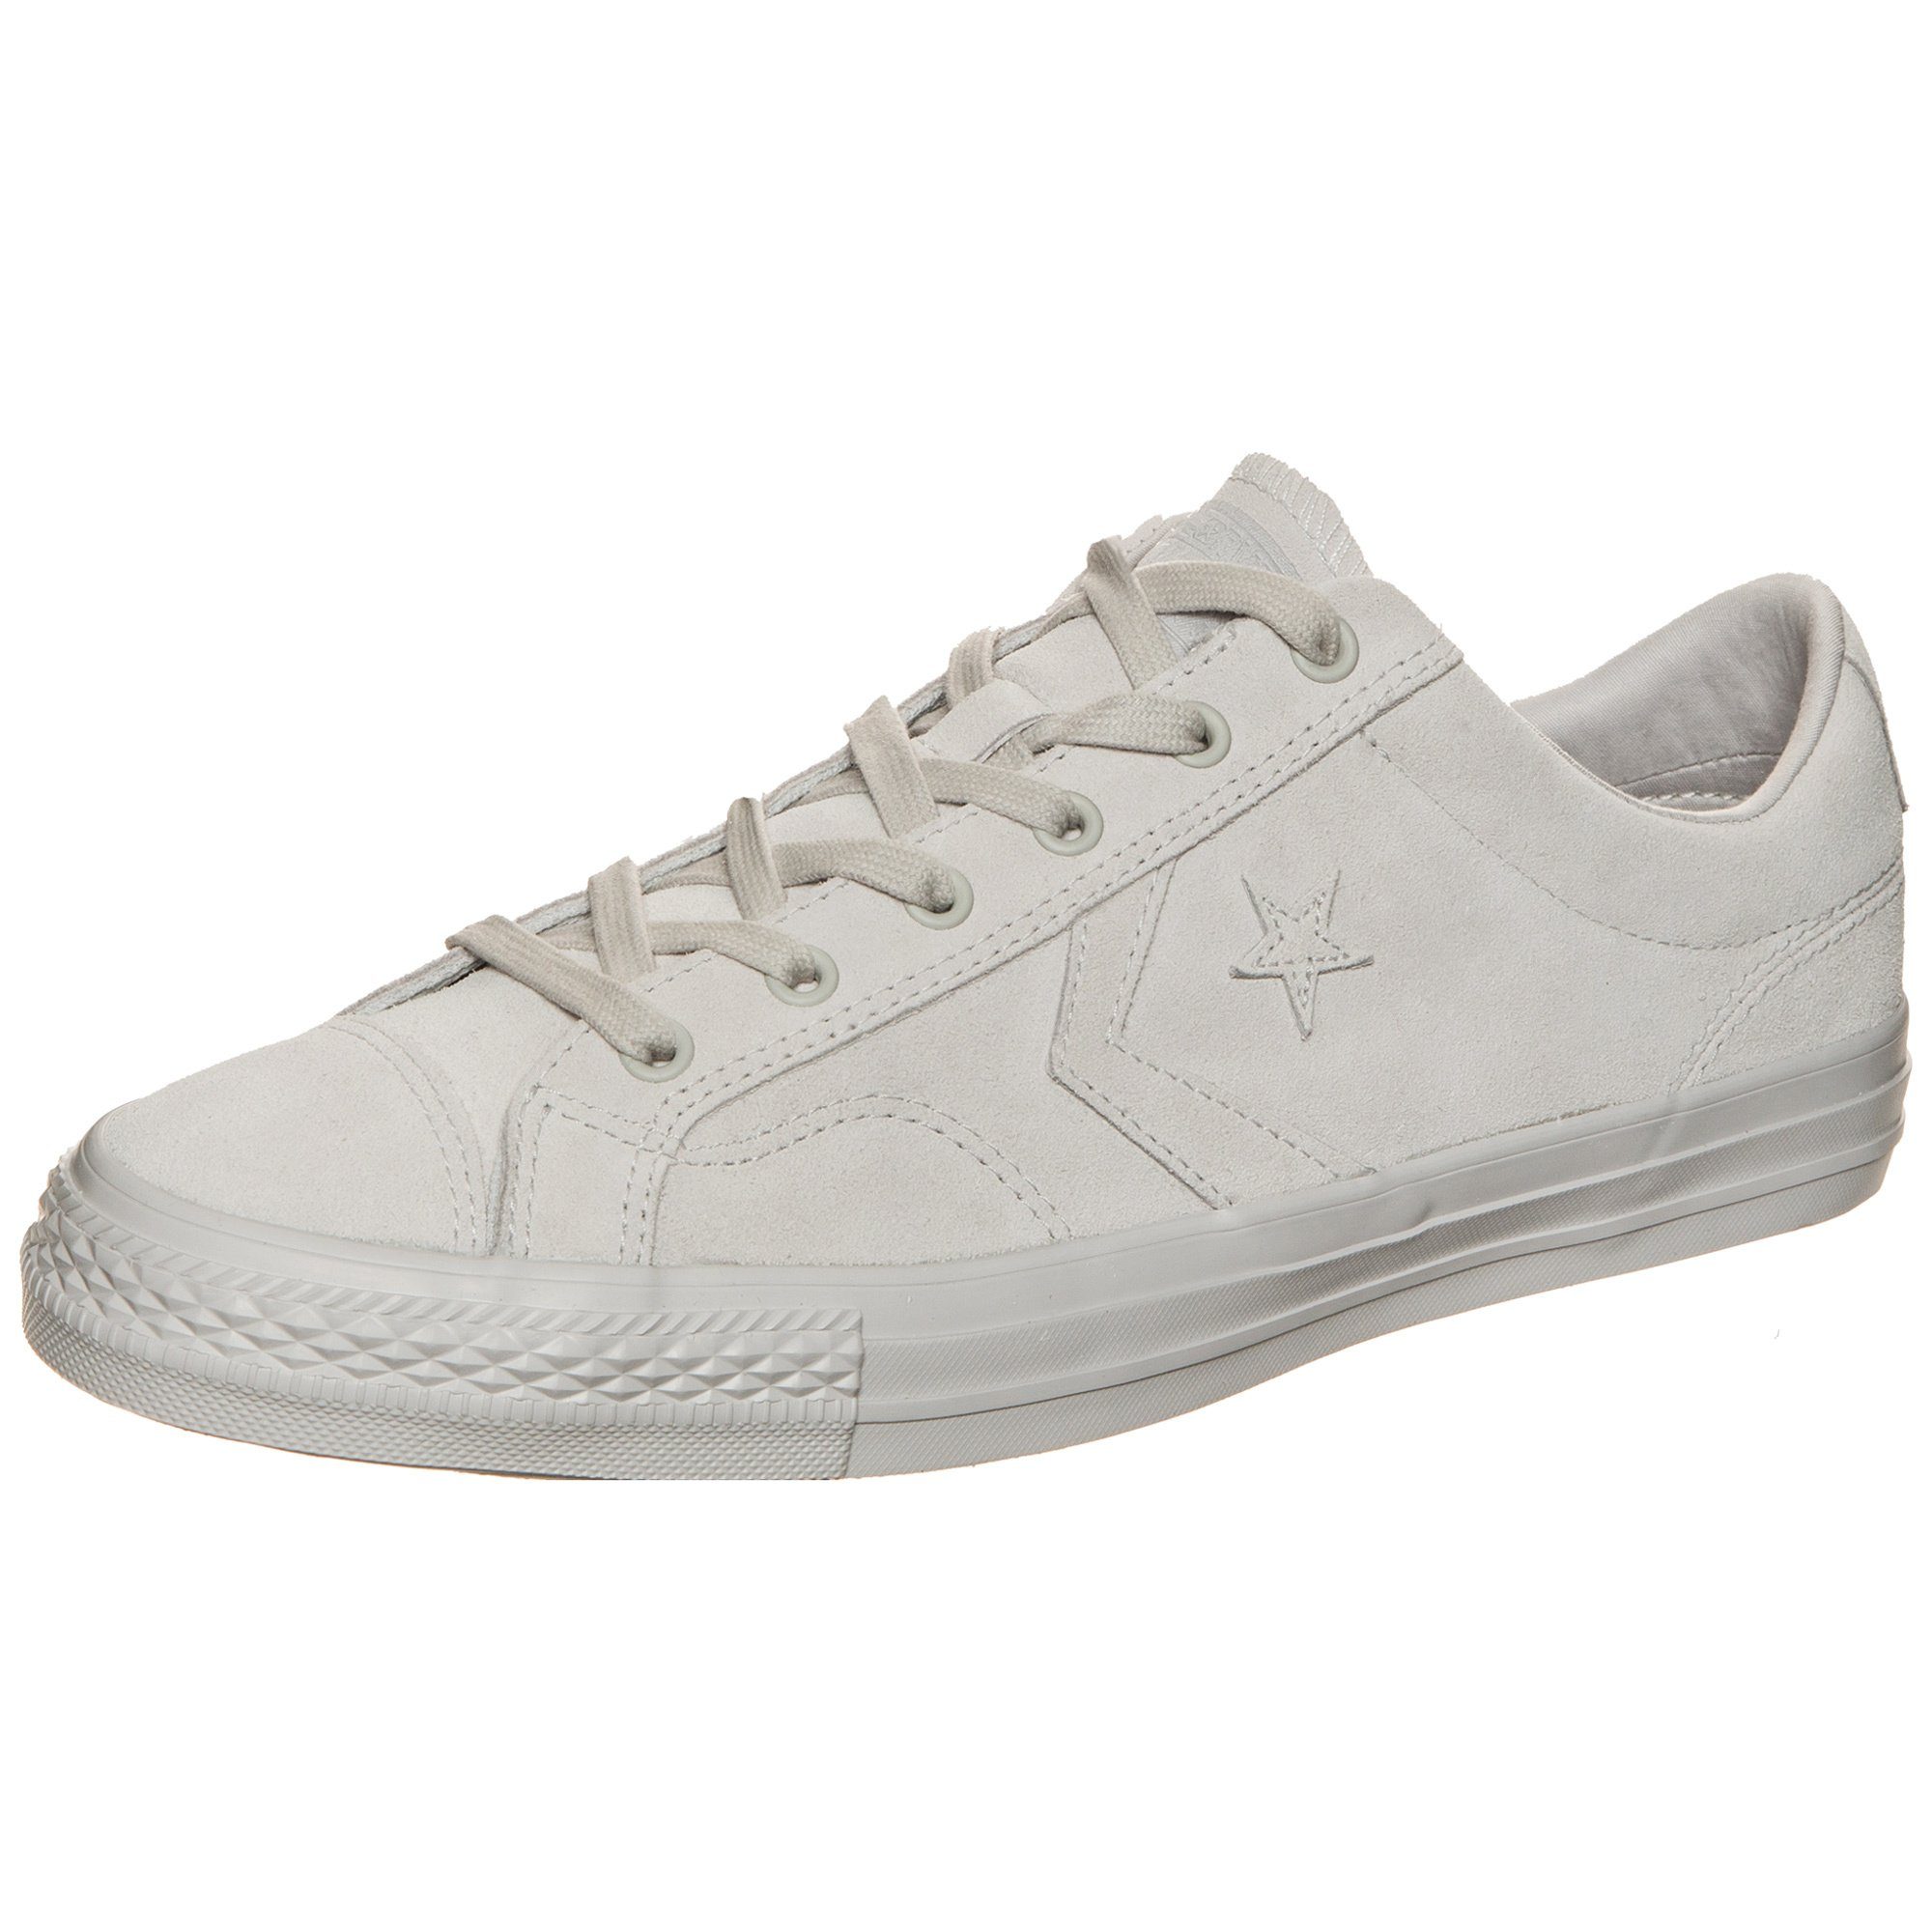 Converse NU 15% KORTING: Converse Star Player OX sneakers